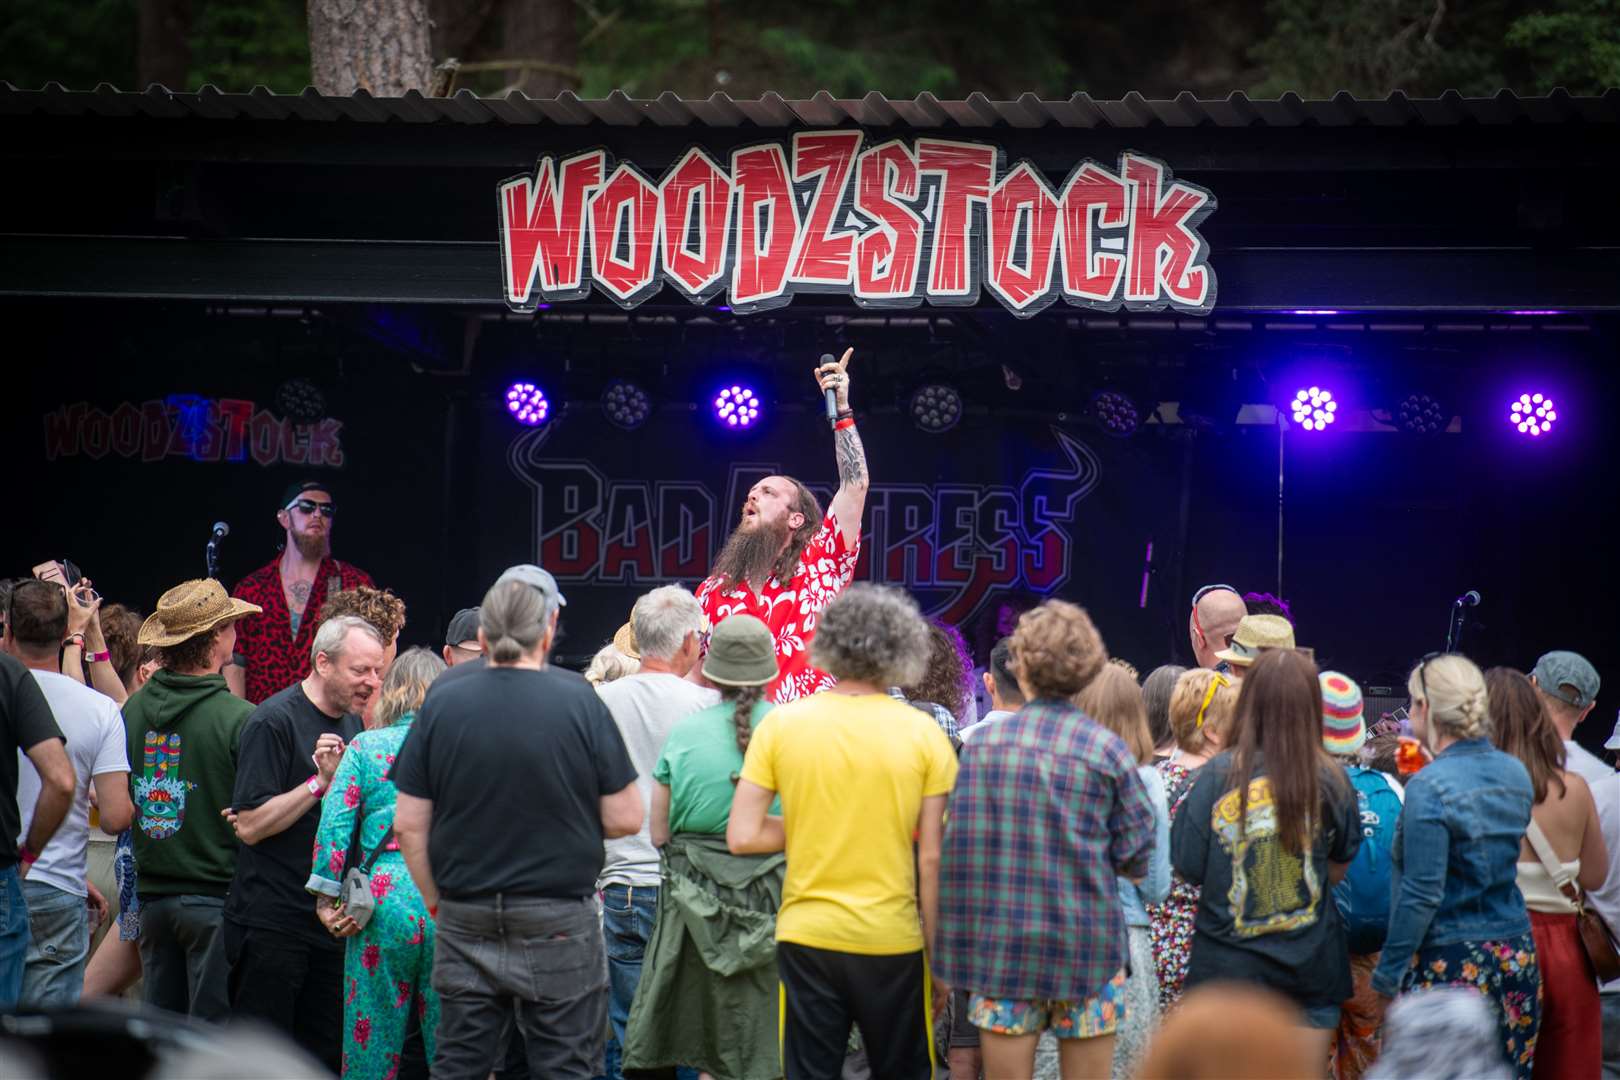 New Bad Actress singer Toby Michaels (centre) in front of Woodzsock's main stage crowd. Picture: Callum Mackay